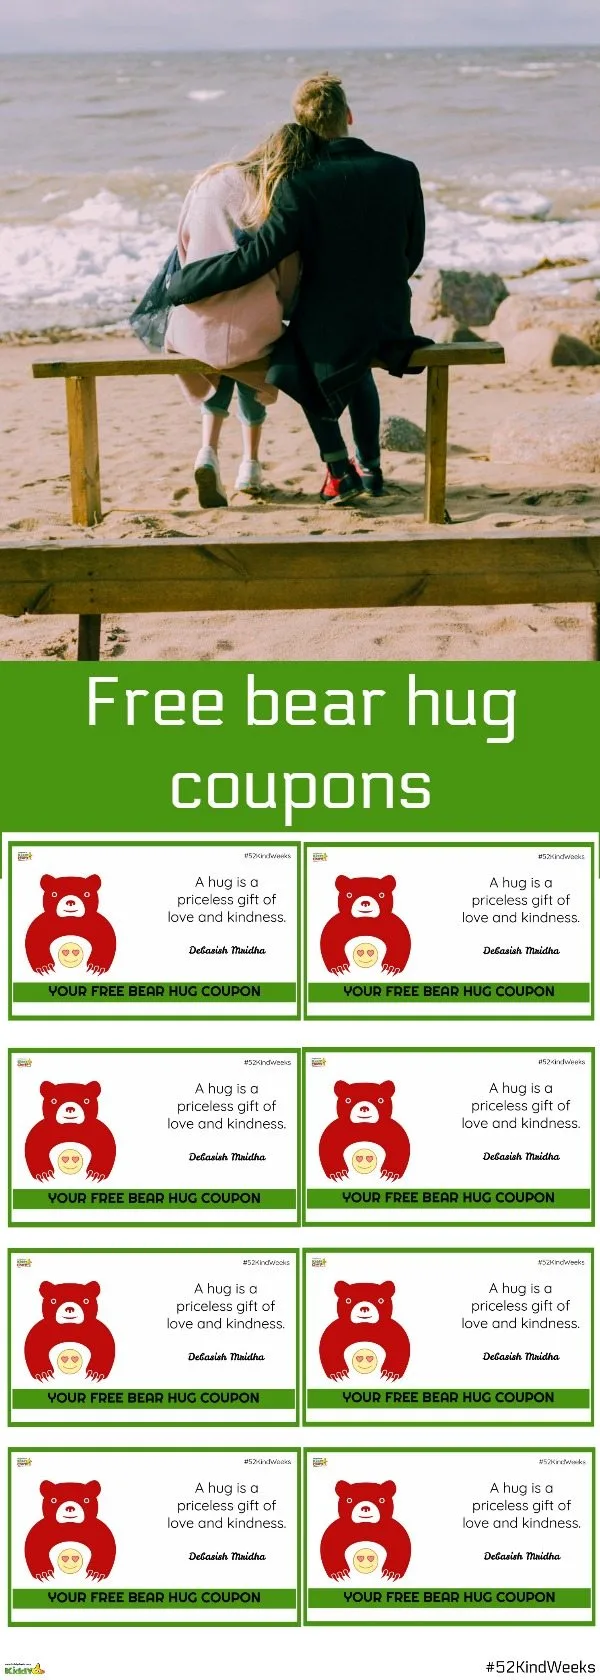 We hope you love our free bear hug coupons as much as we do!